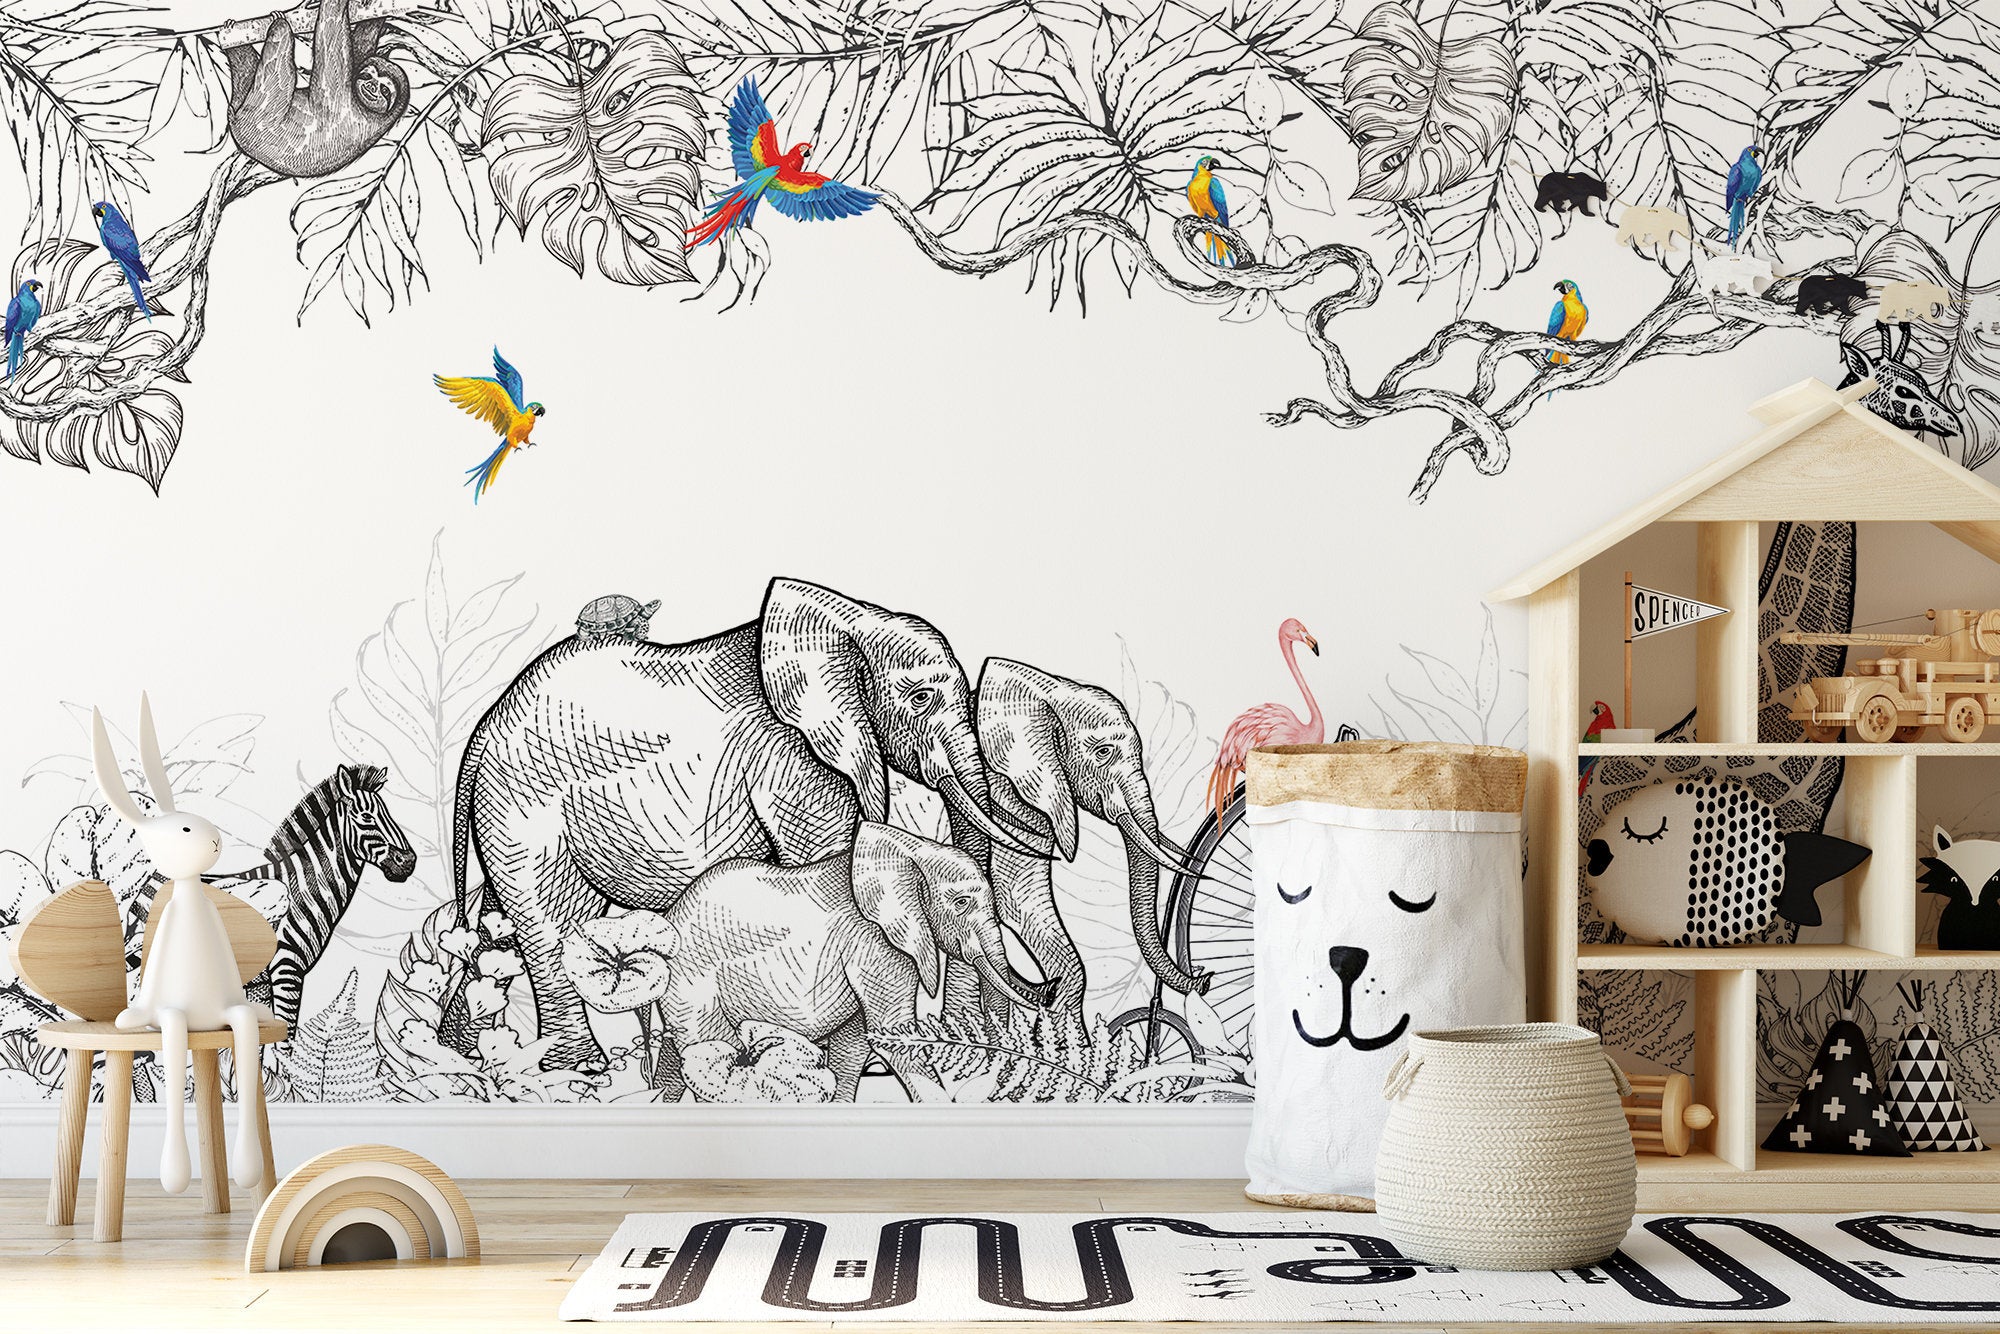 Hand Draw Elephants Trees Leaves and Flamingo Colorful Birds Wallpaper Animal Confused Children Kids Room Nursery Mural Home Decor Wall Art